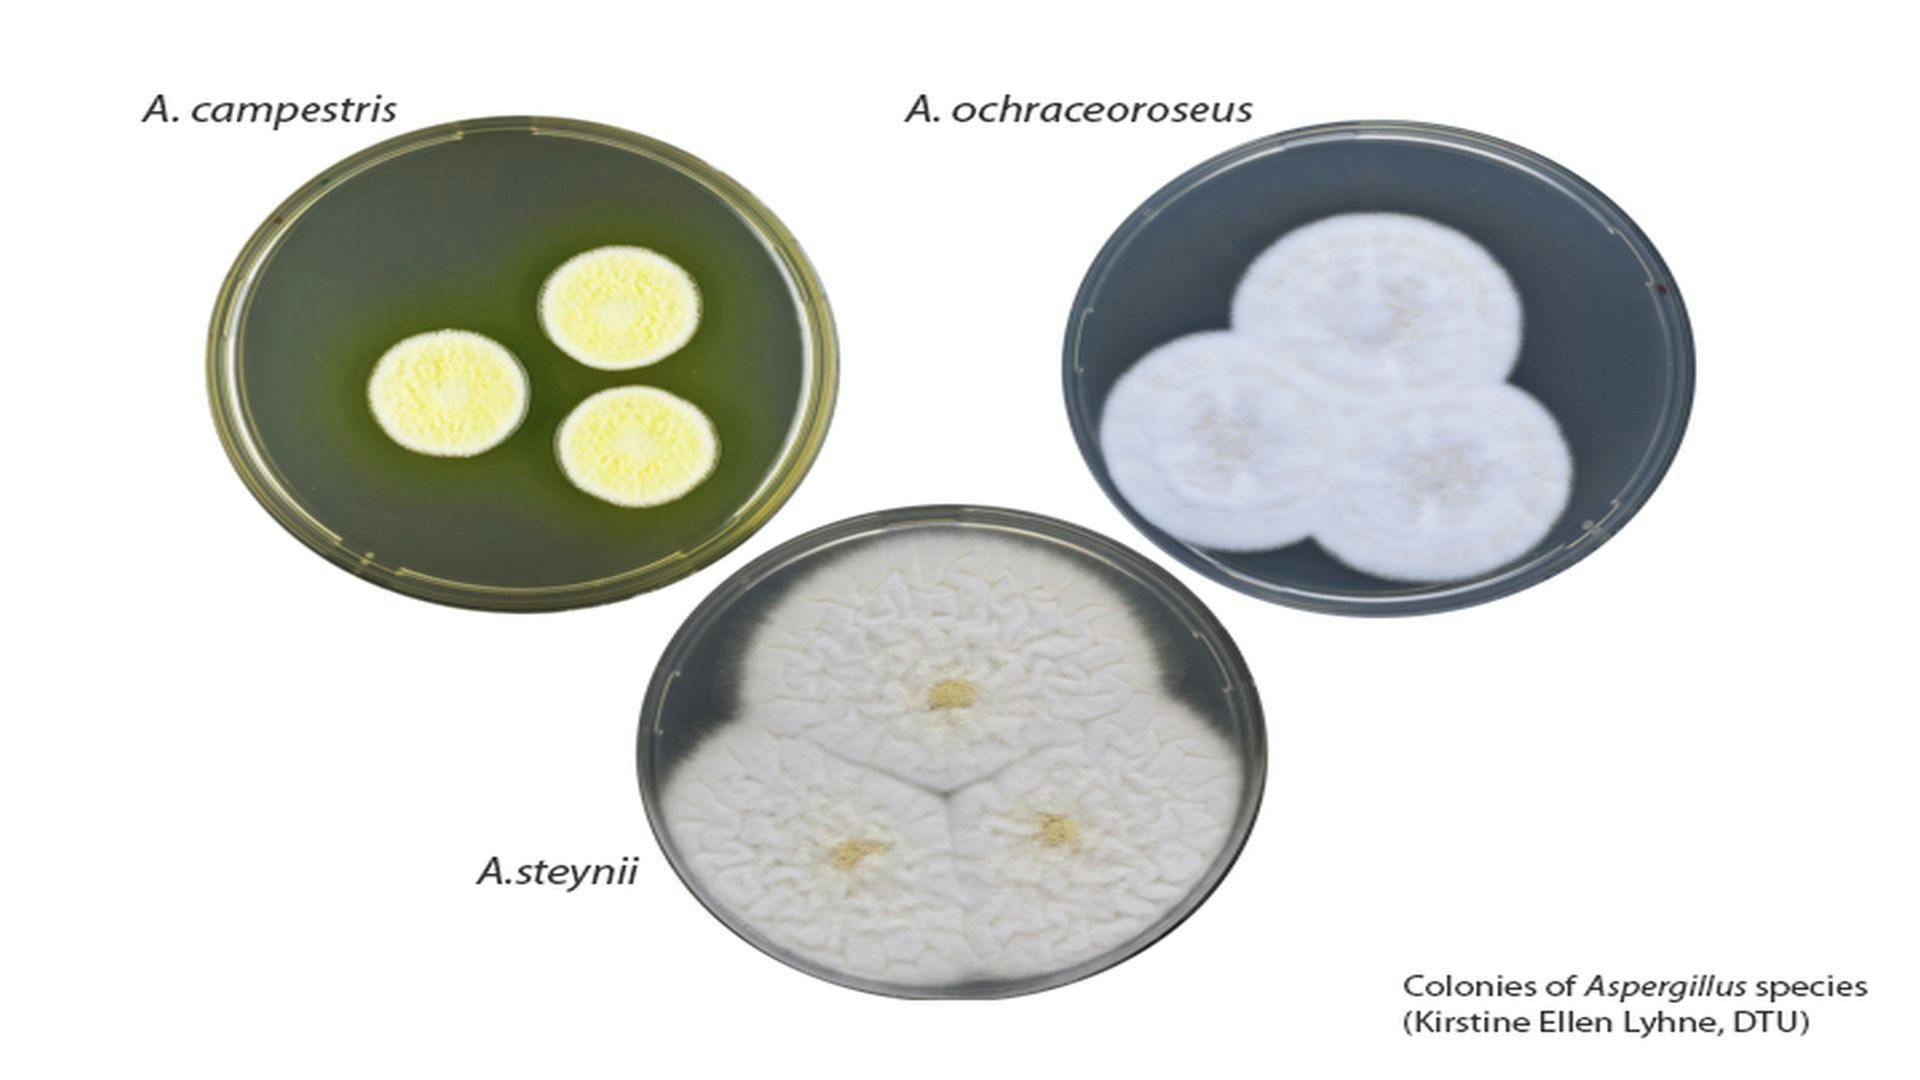 Genus-wide Aspergillus Project Highlights New Functional Genome Annotation Methods